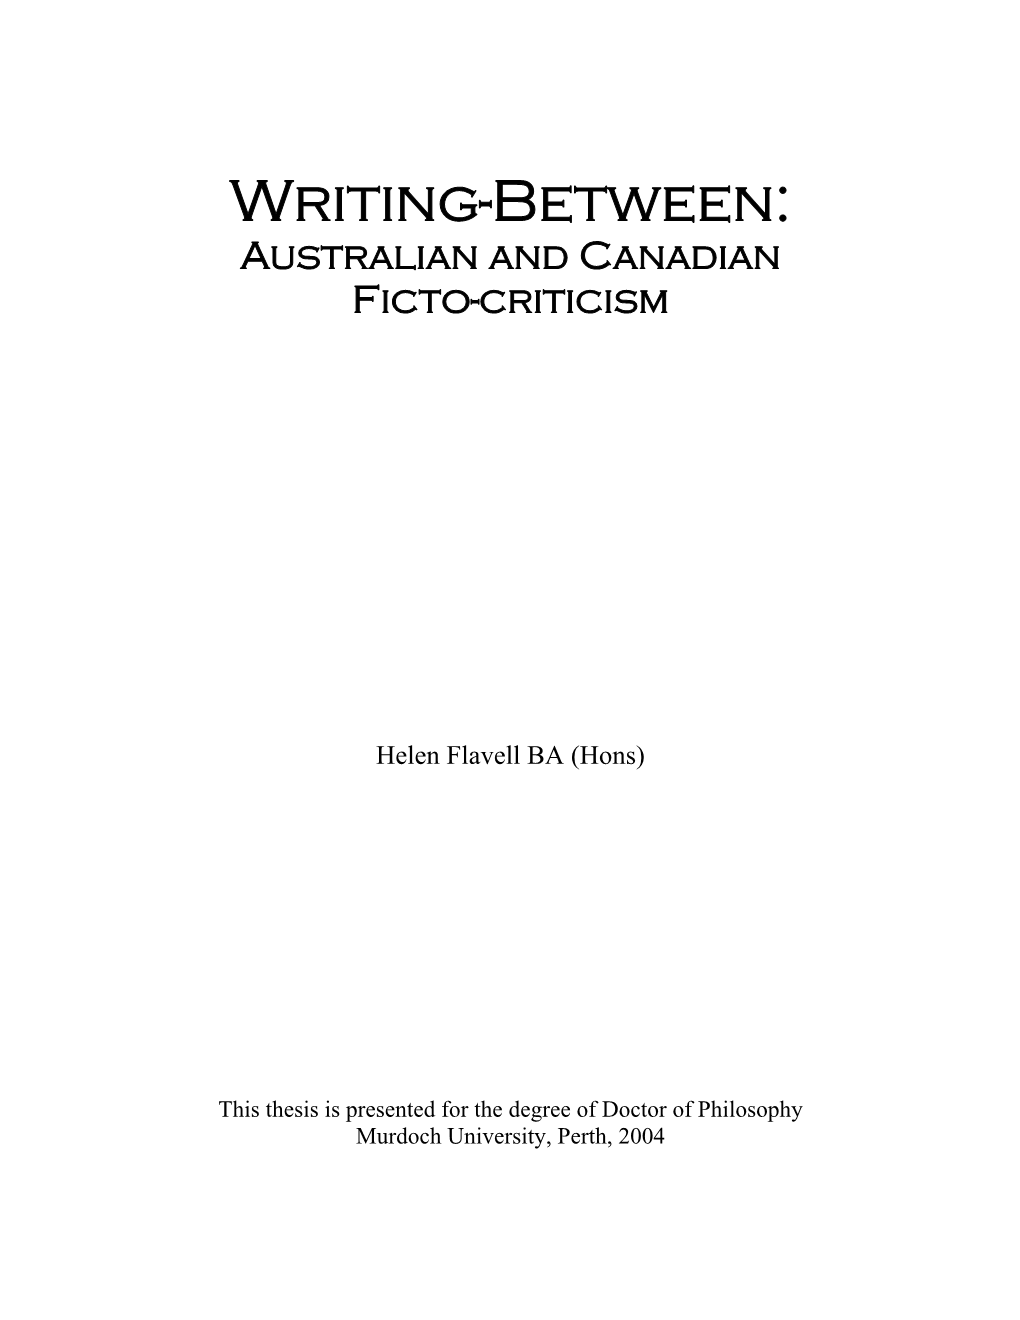 Writing-Between: Australian and Canadian Ficto-Criticism